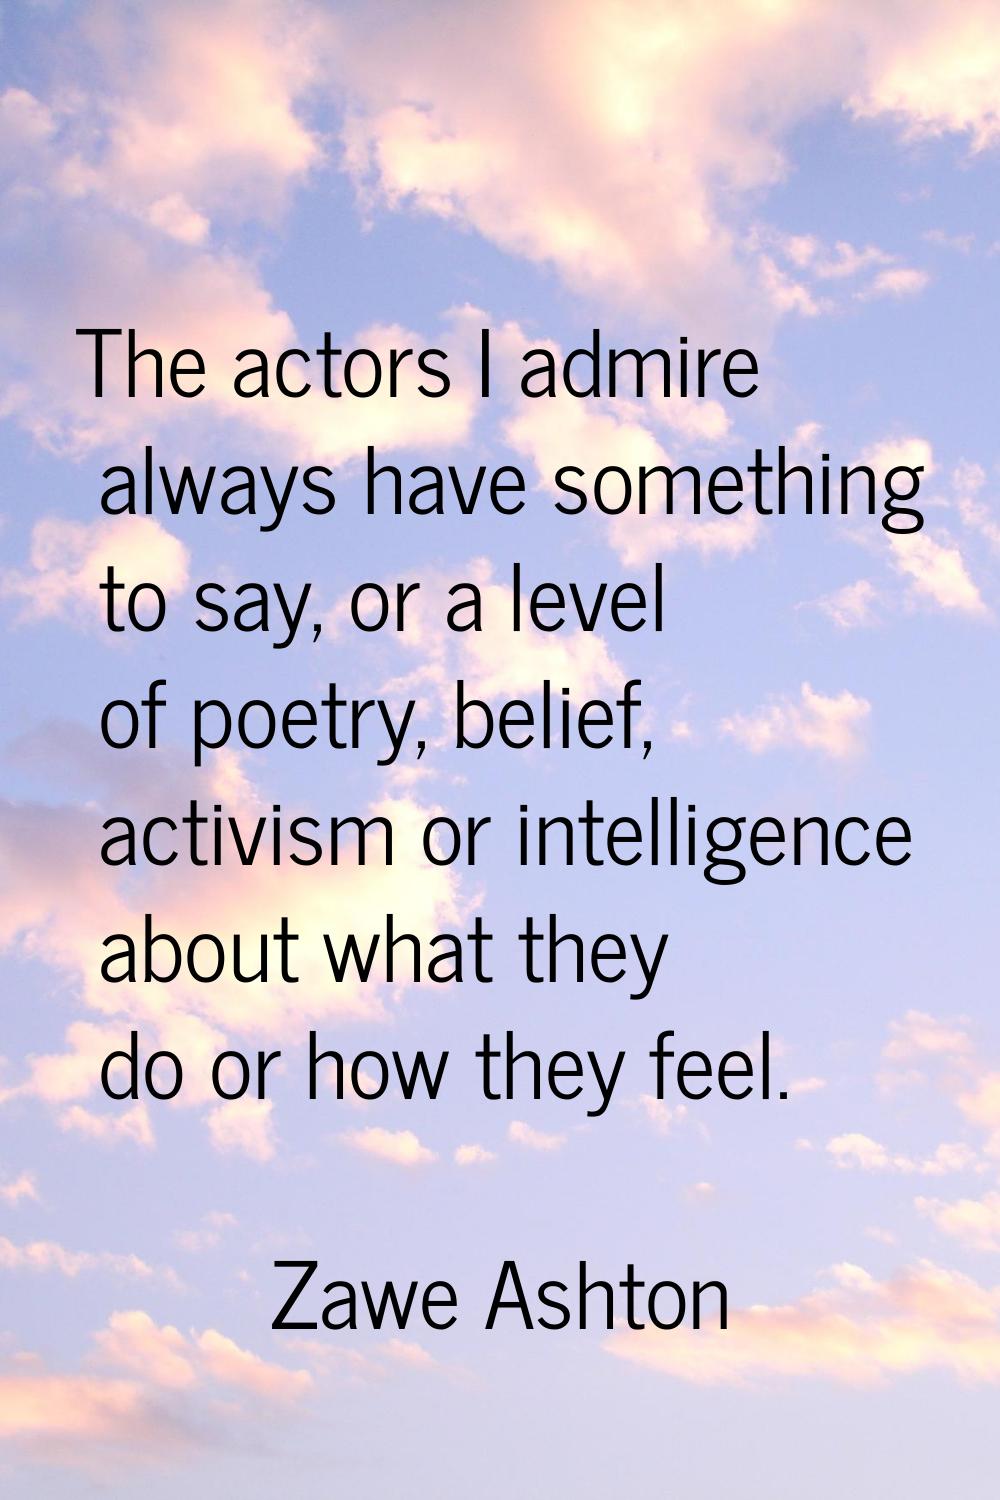 The actors I admire always have something to say, or a level of poetry, belief, activism or intelli